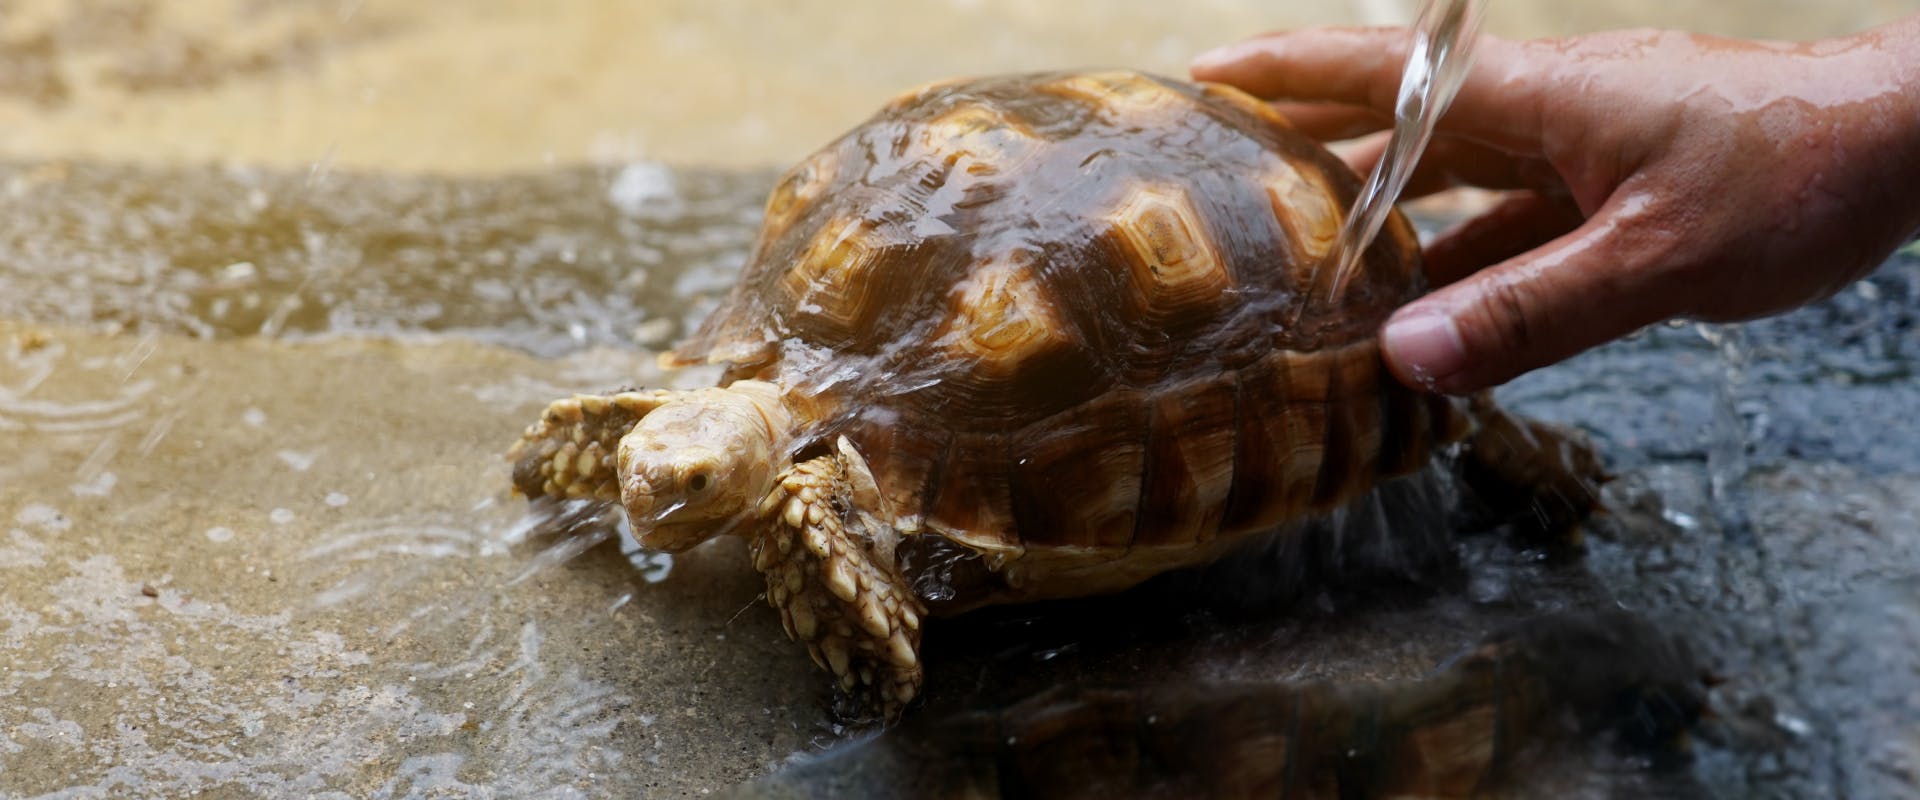 A pet tortoise being washed.